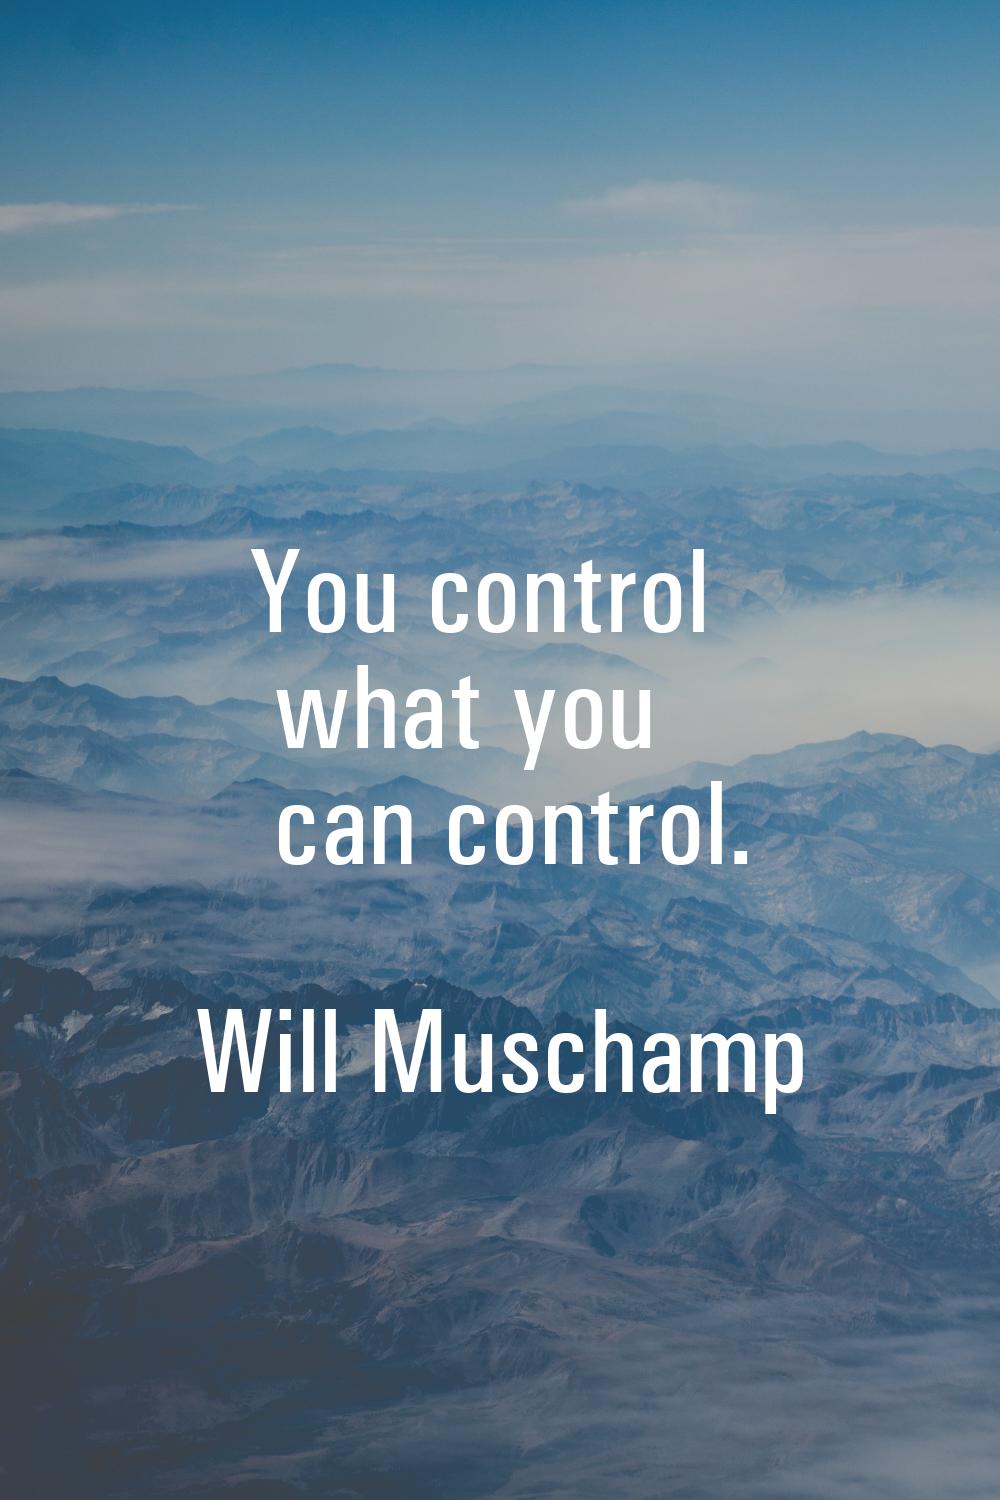 You control what you can control.